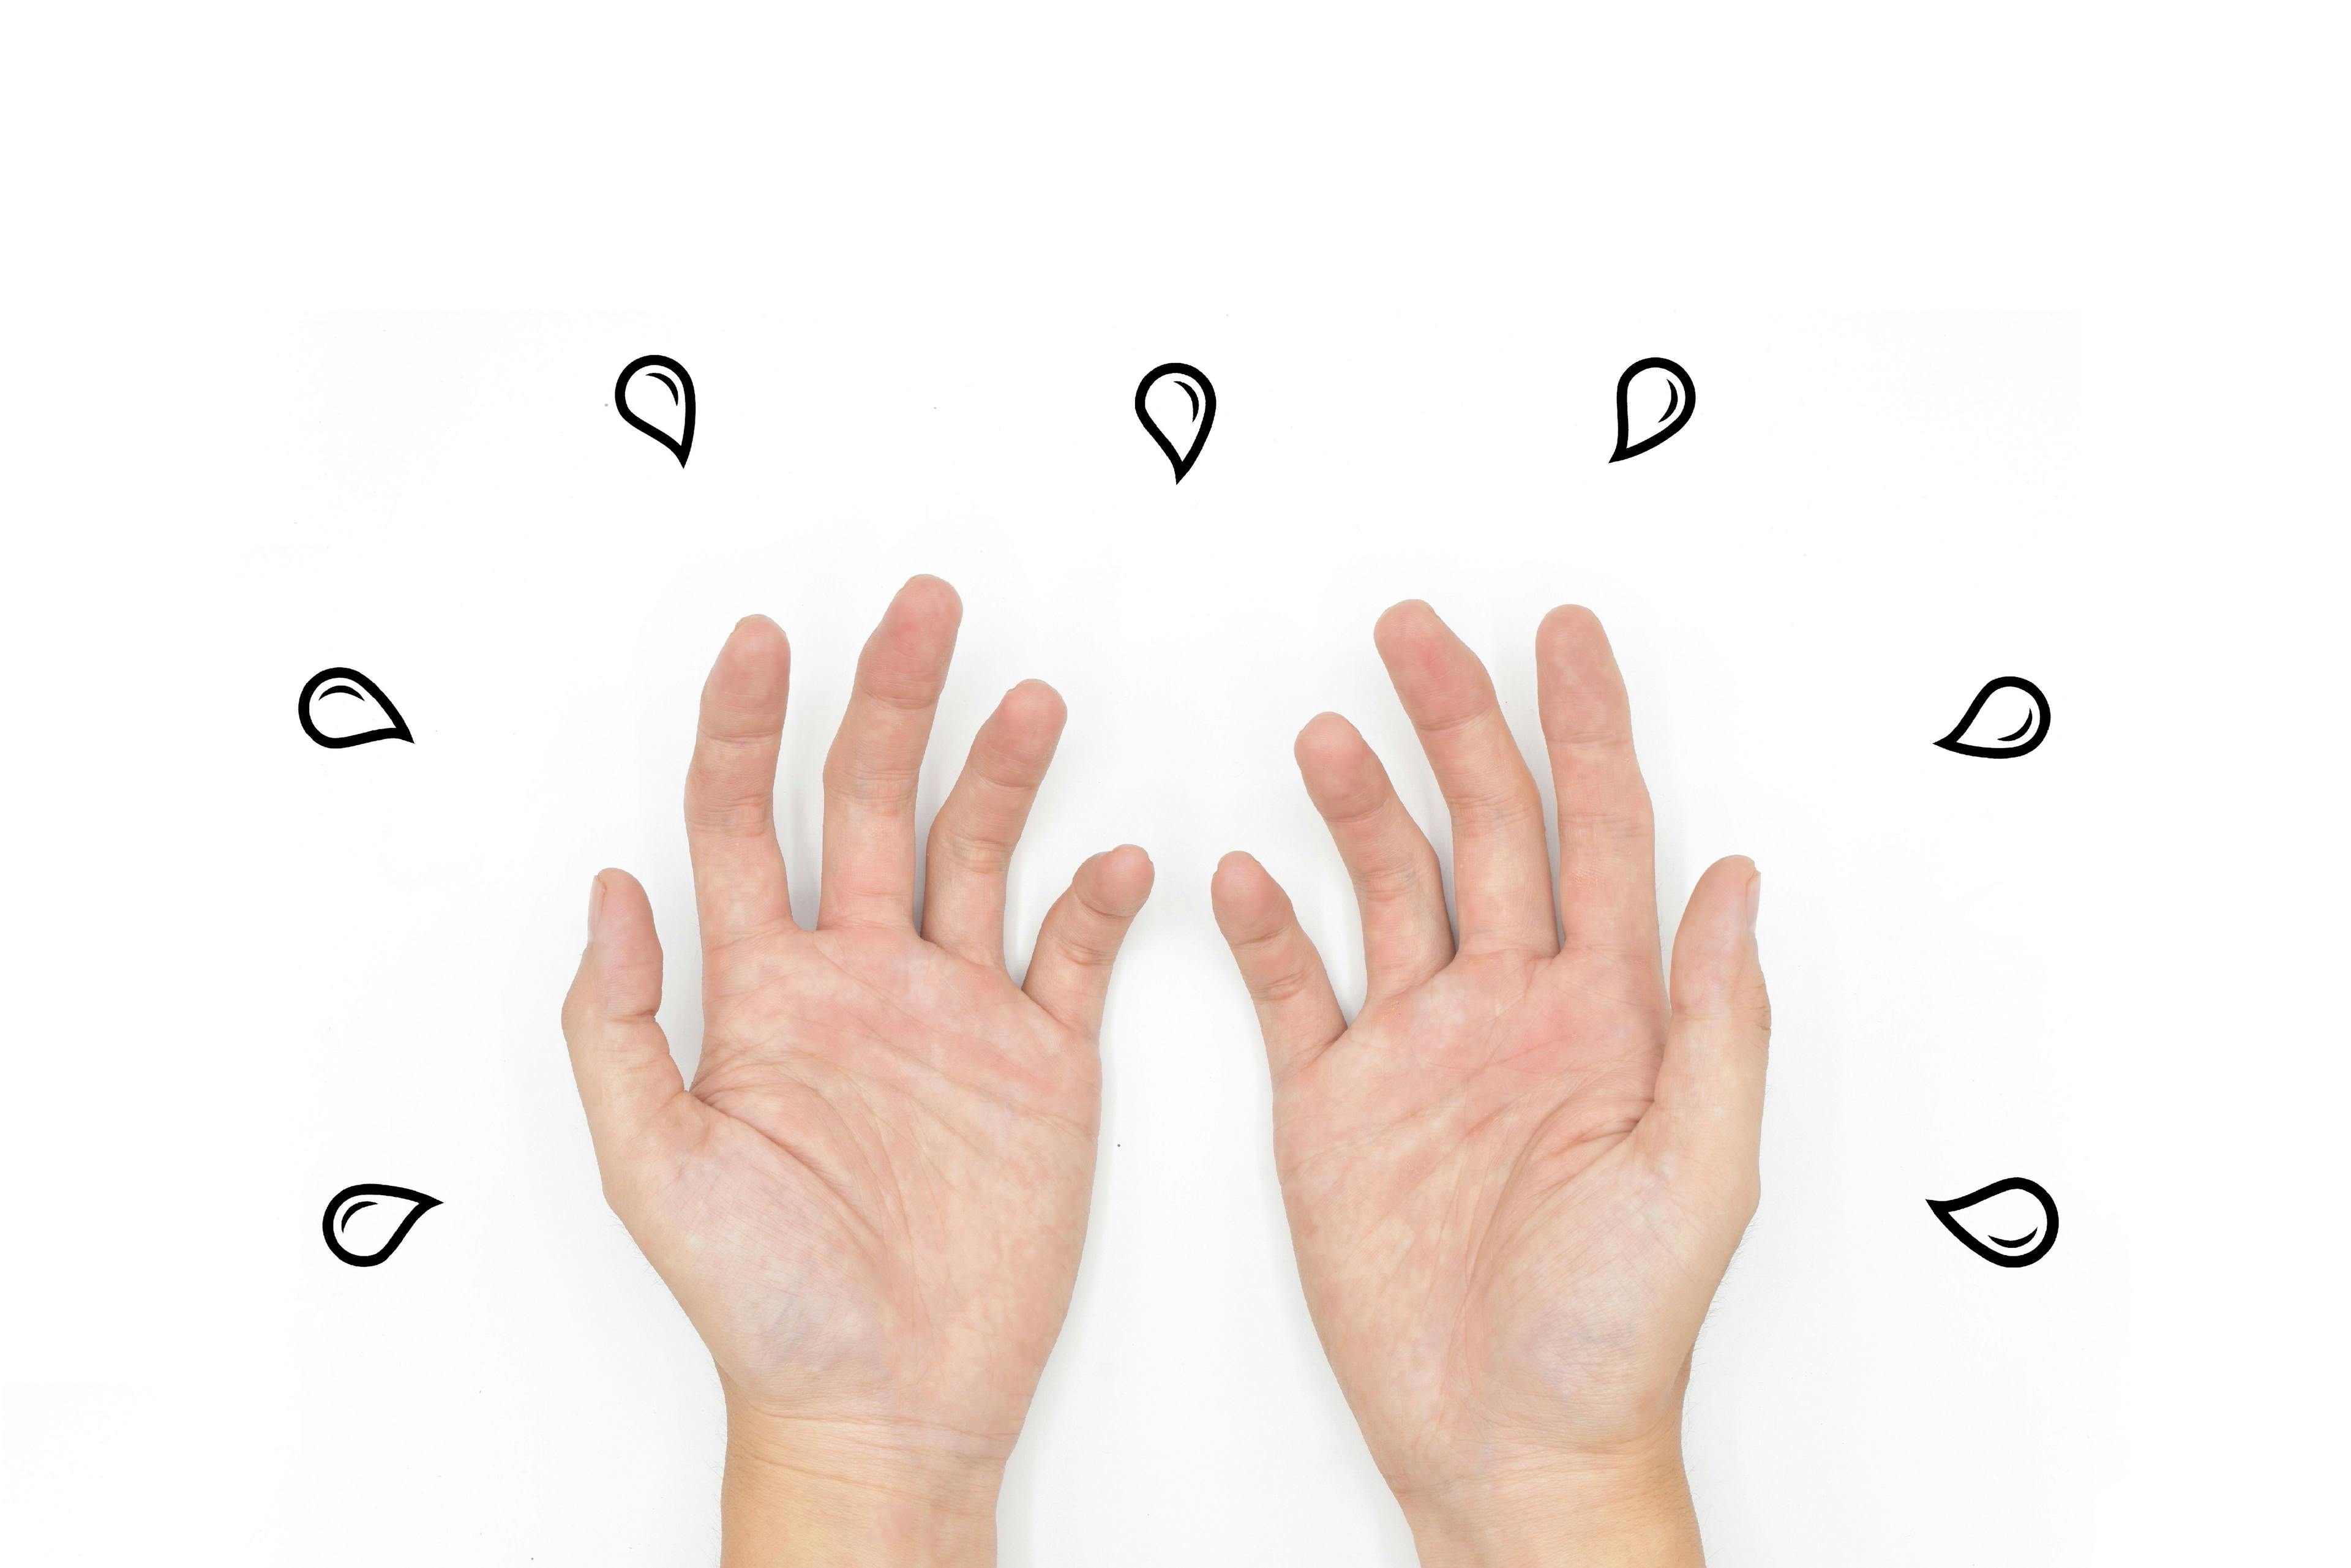 POLL: What Is Your Go-to Treatment for Severe Palmar Hyperhidrosis?